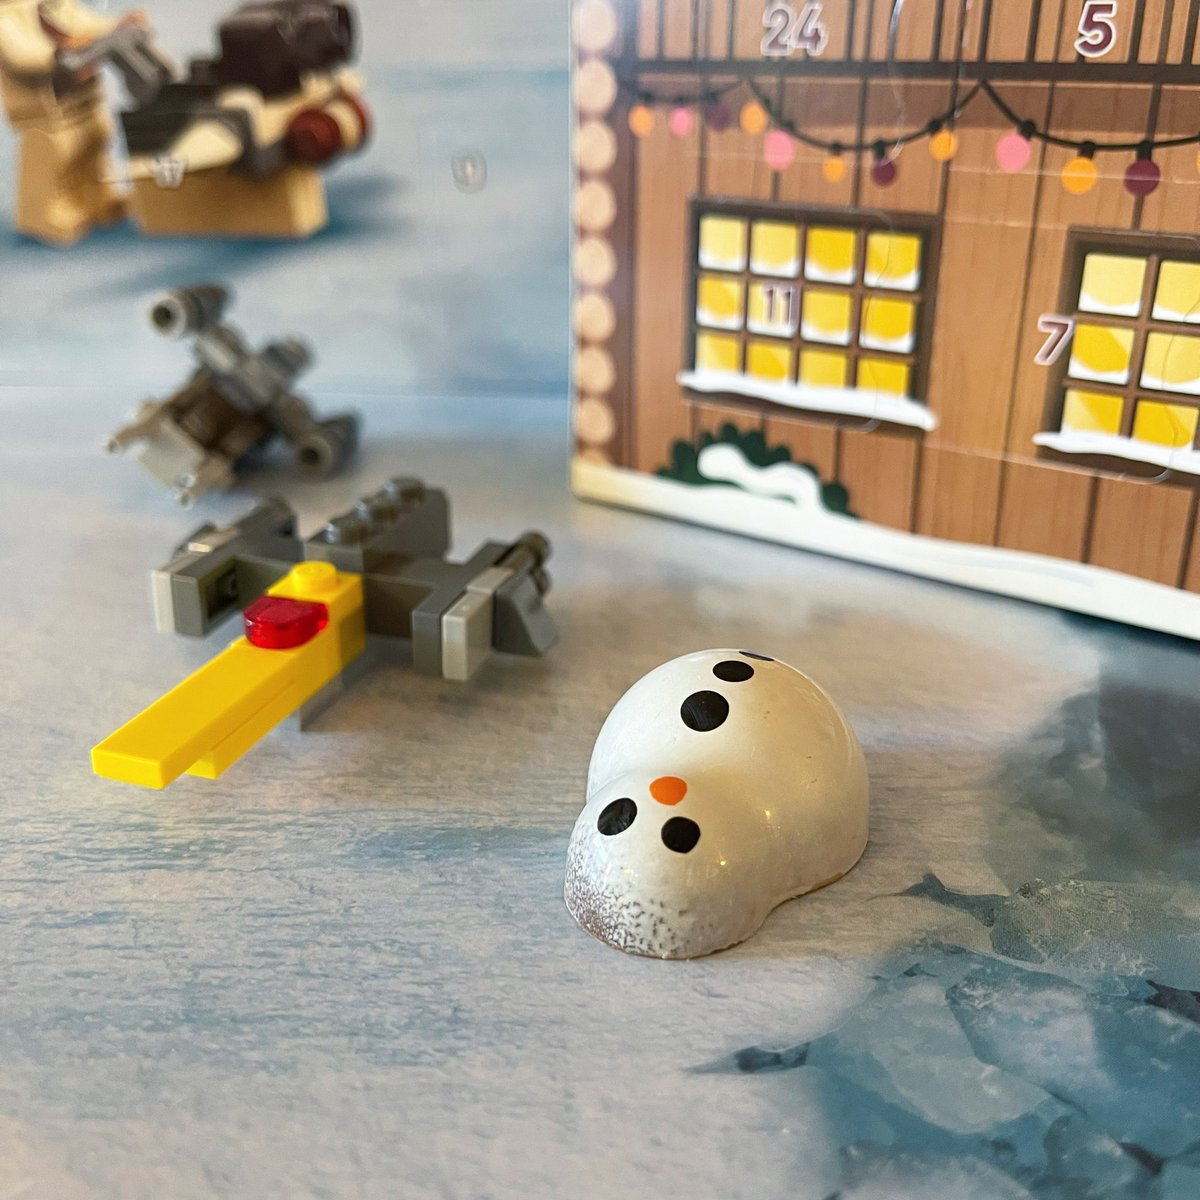 Advent Day 2: Riot Mar Starfighter (I had to Google this one - From S1 Mandalorian!) & Orange chocolate snowman. @lego @TherapyCocoa #adventcalendar